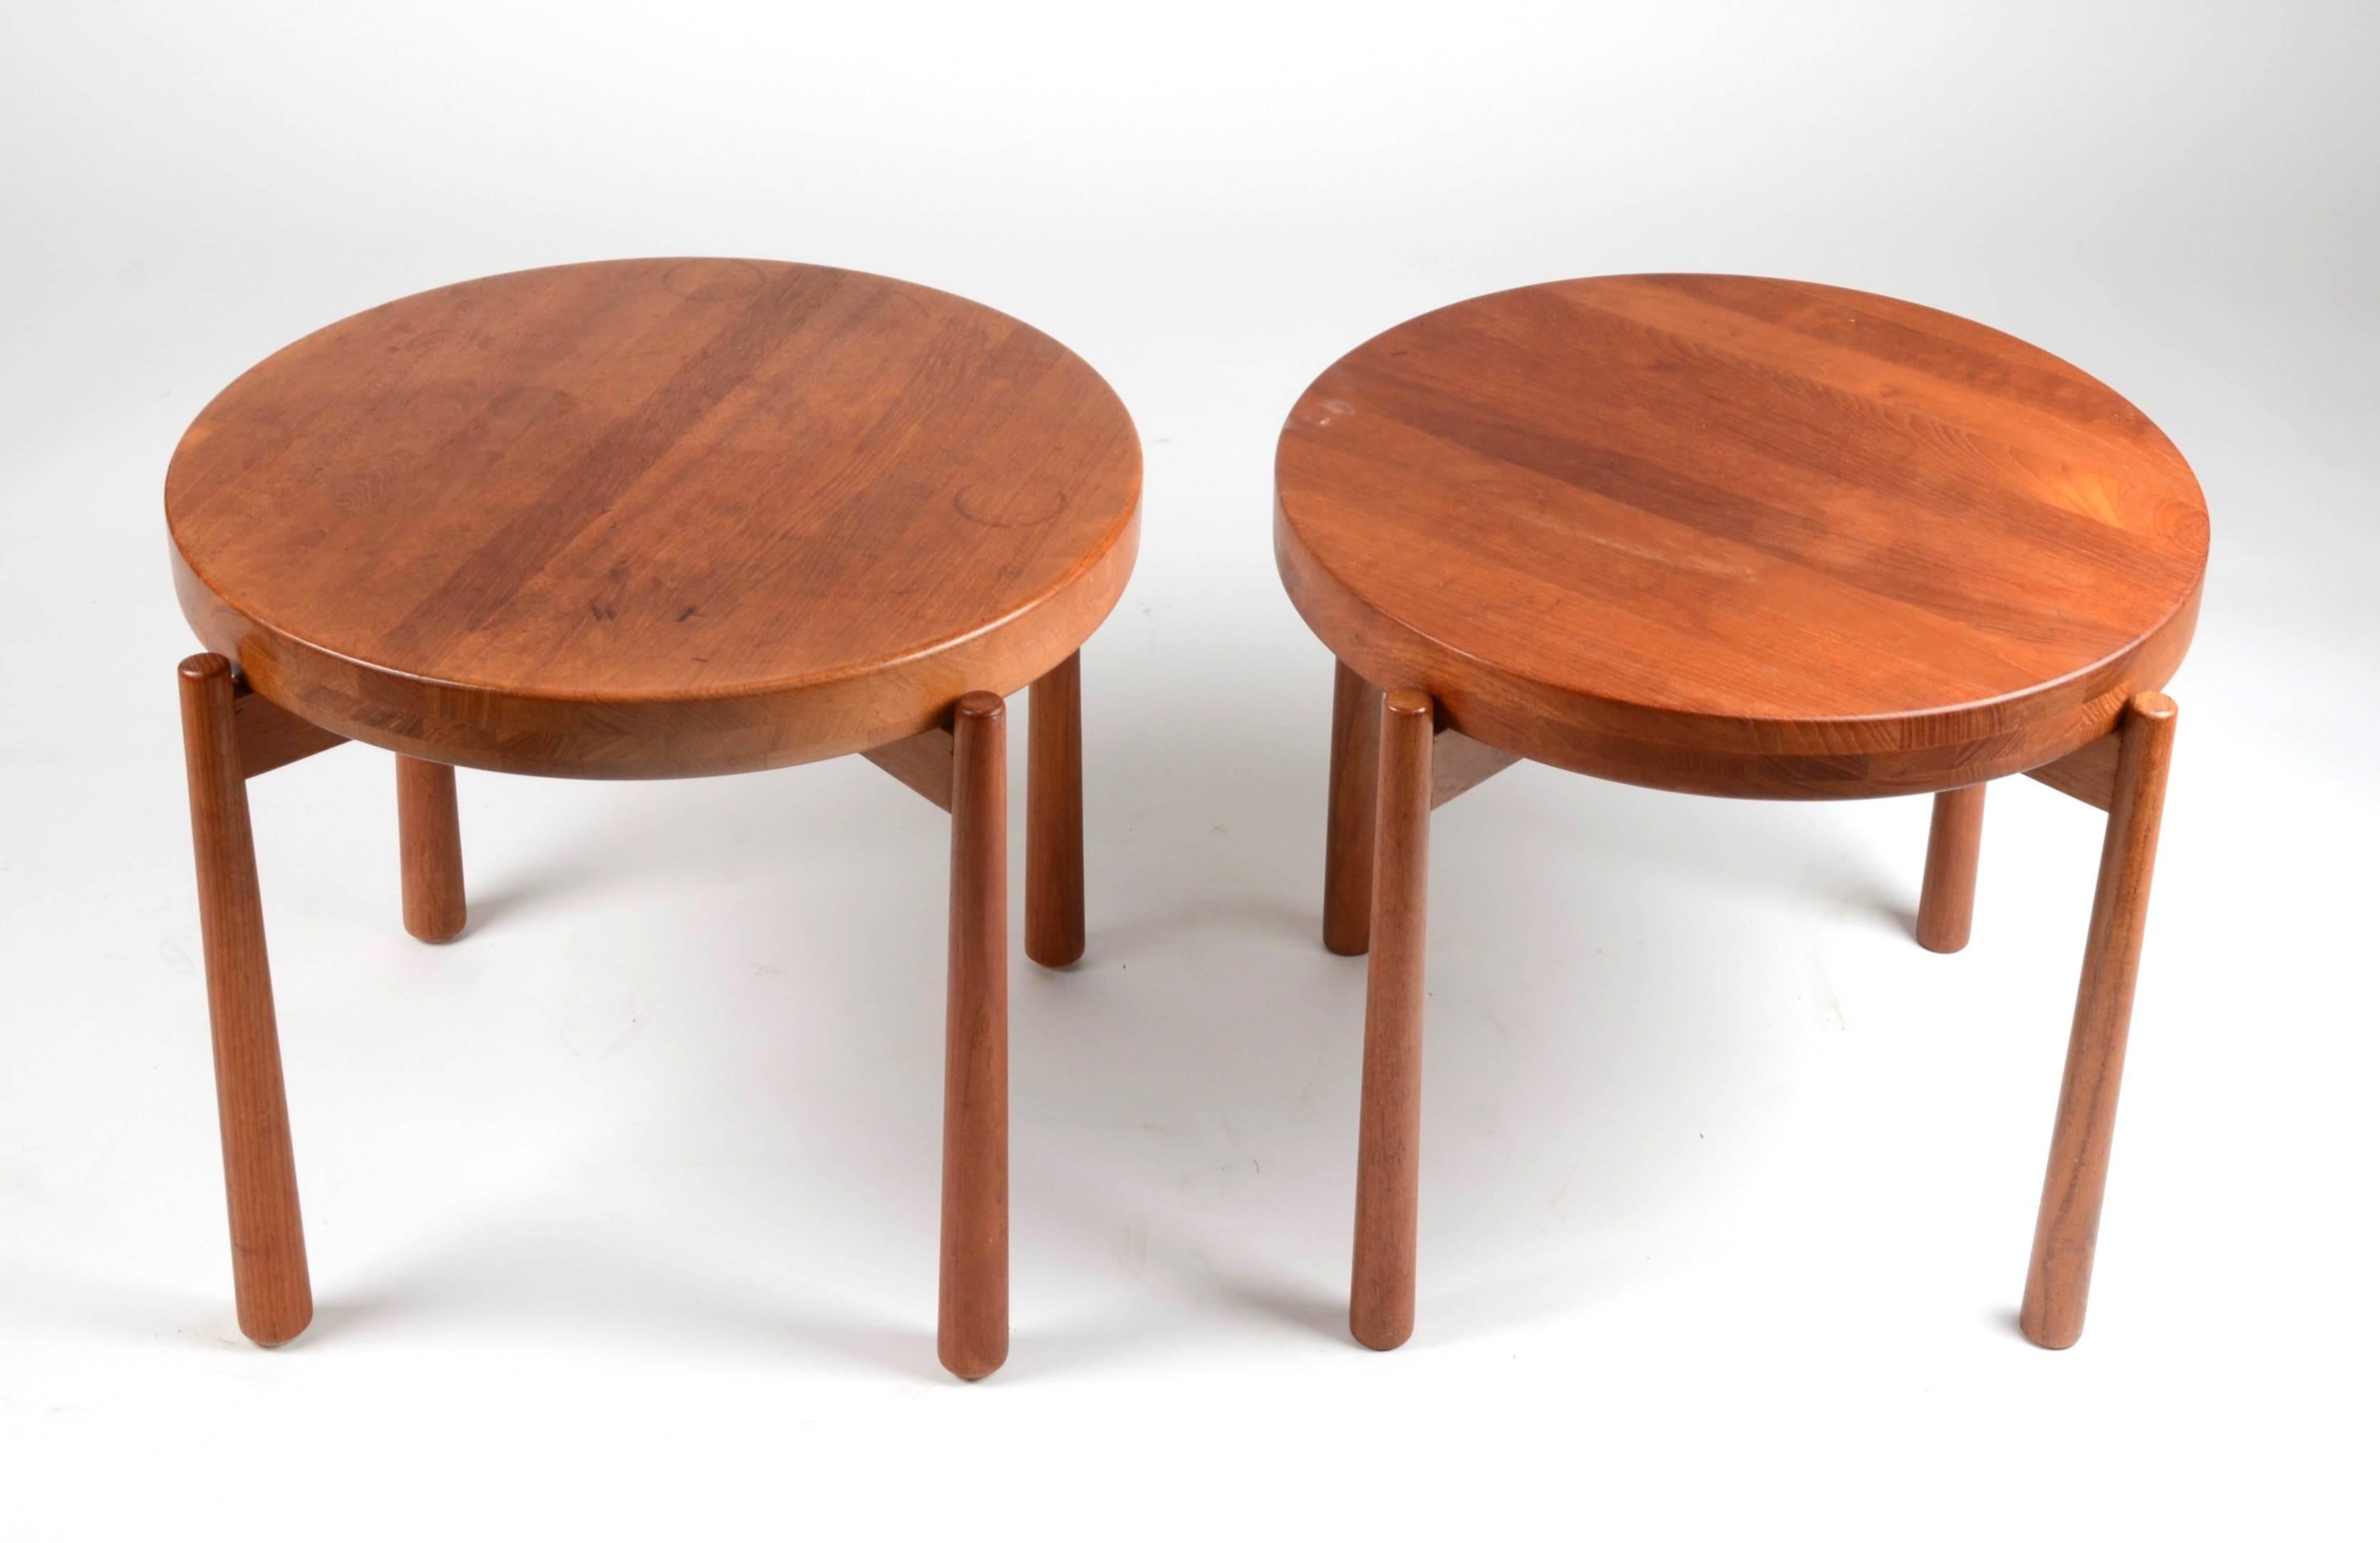 Scandinavian Modern Pair of Tray Tables, in the Style of Jens Quistgaard, Denmark, Mid-1900s For Sale